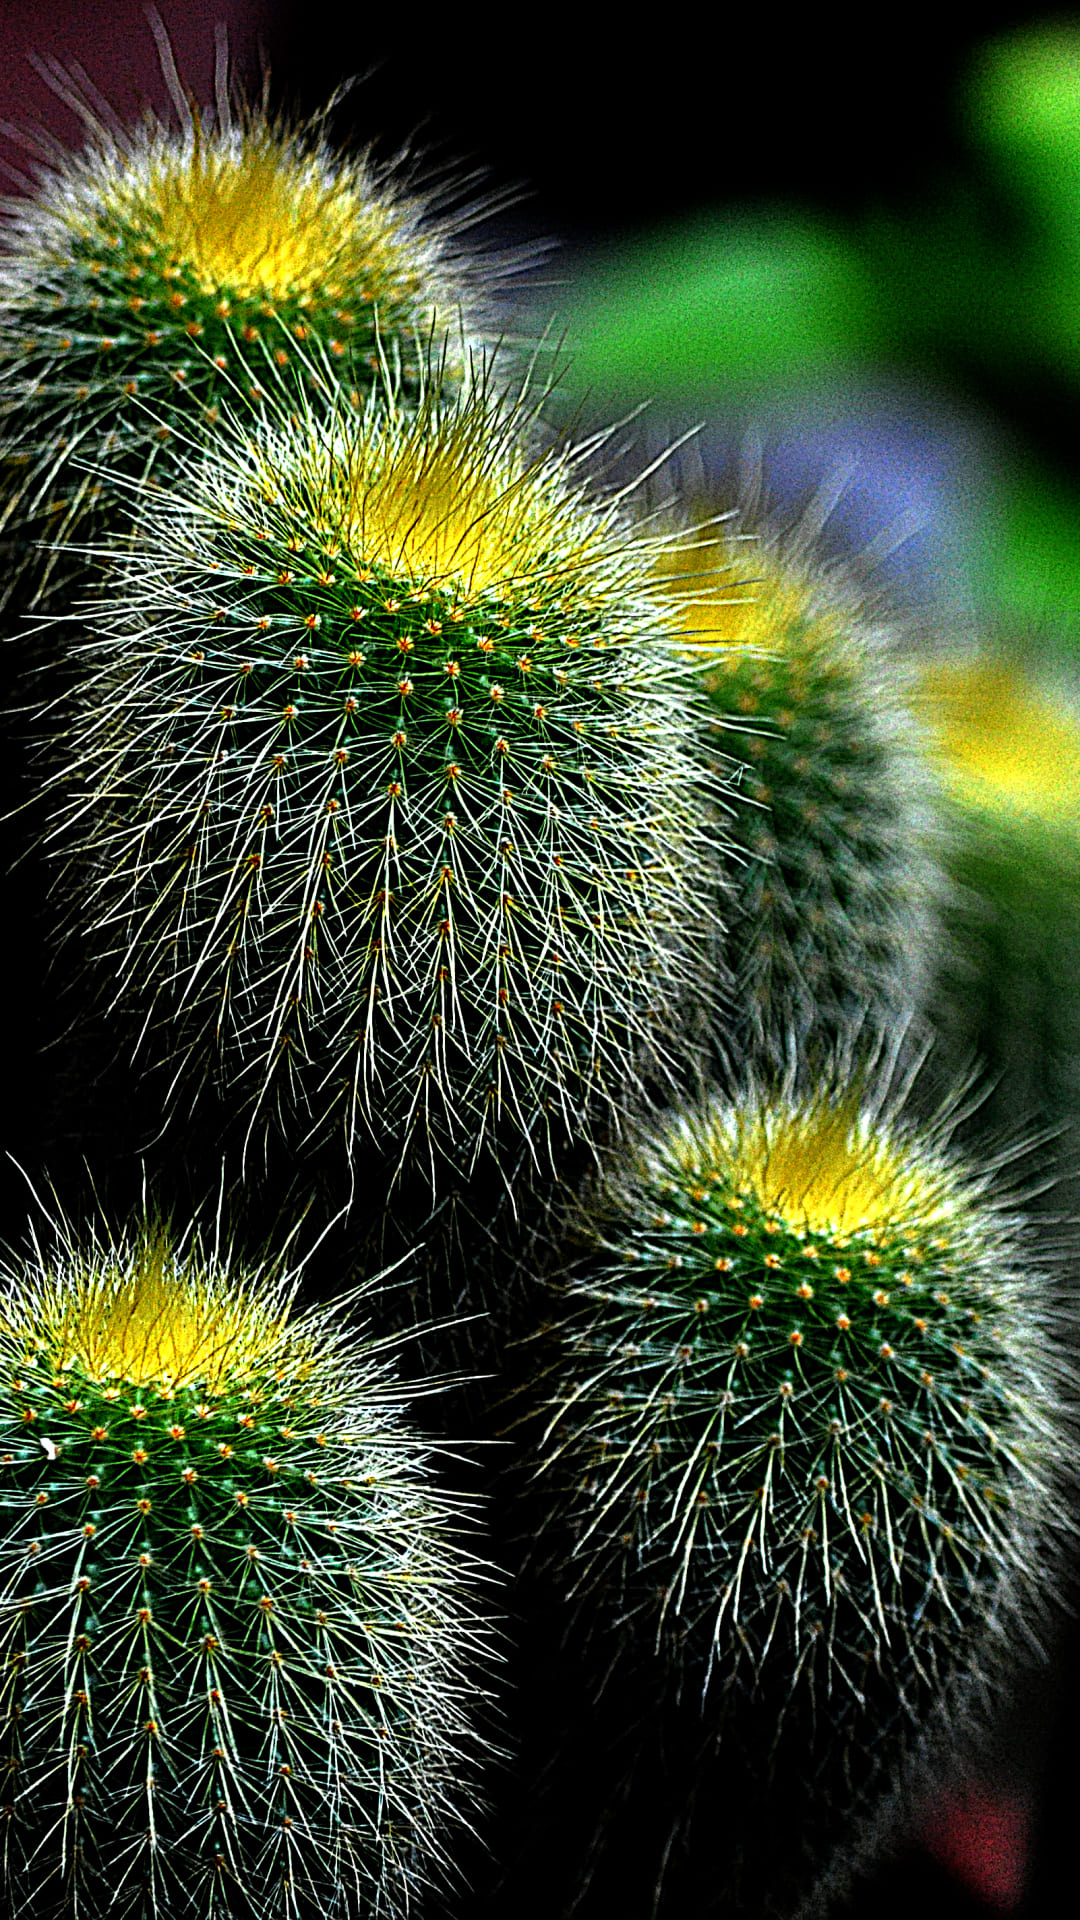 Cactus: A plant that can store large amounts of water and survive in extremely hot and dry habitats. 1080x1920 Full HD Background.